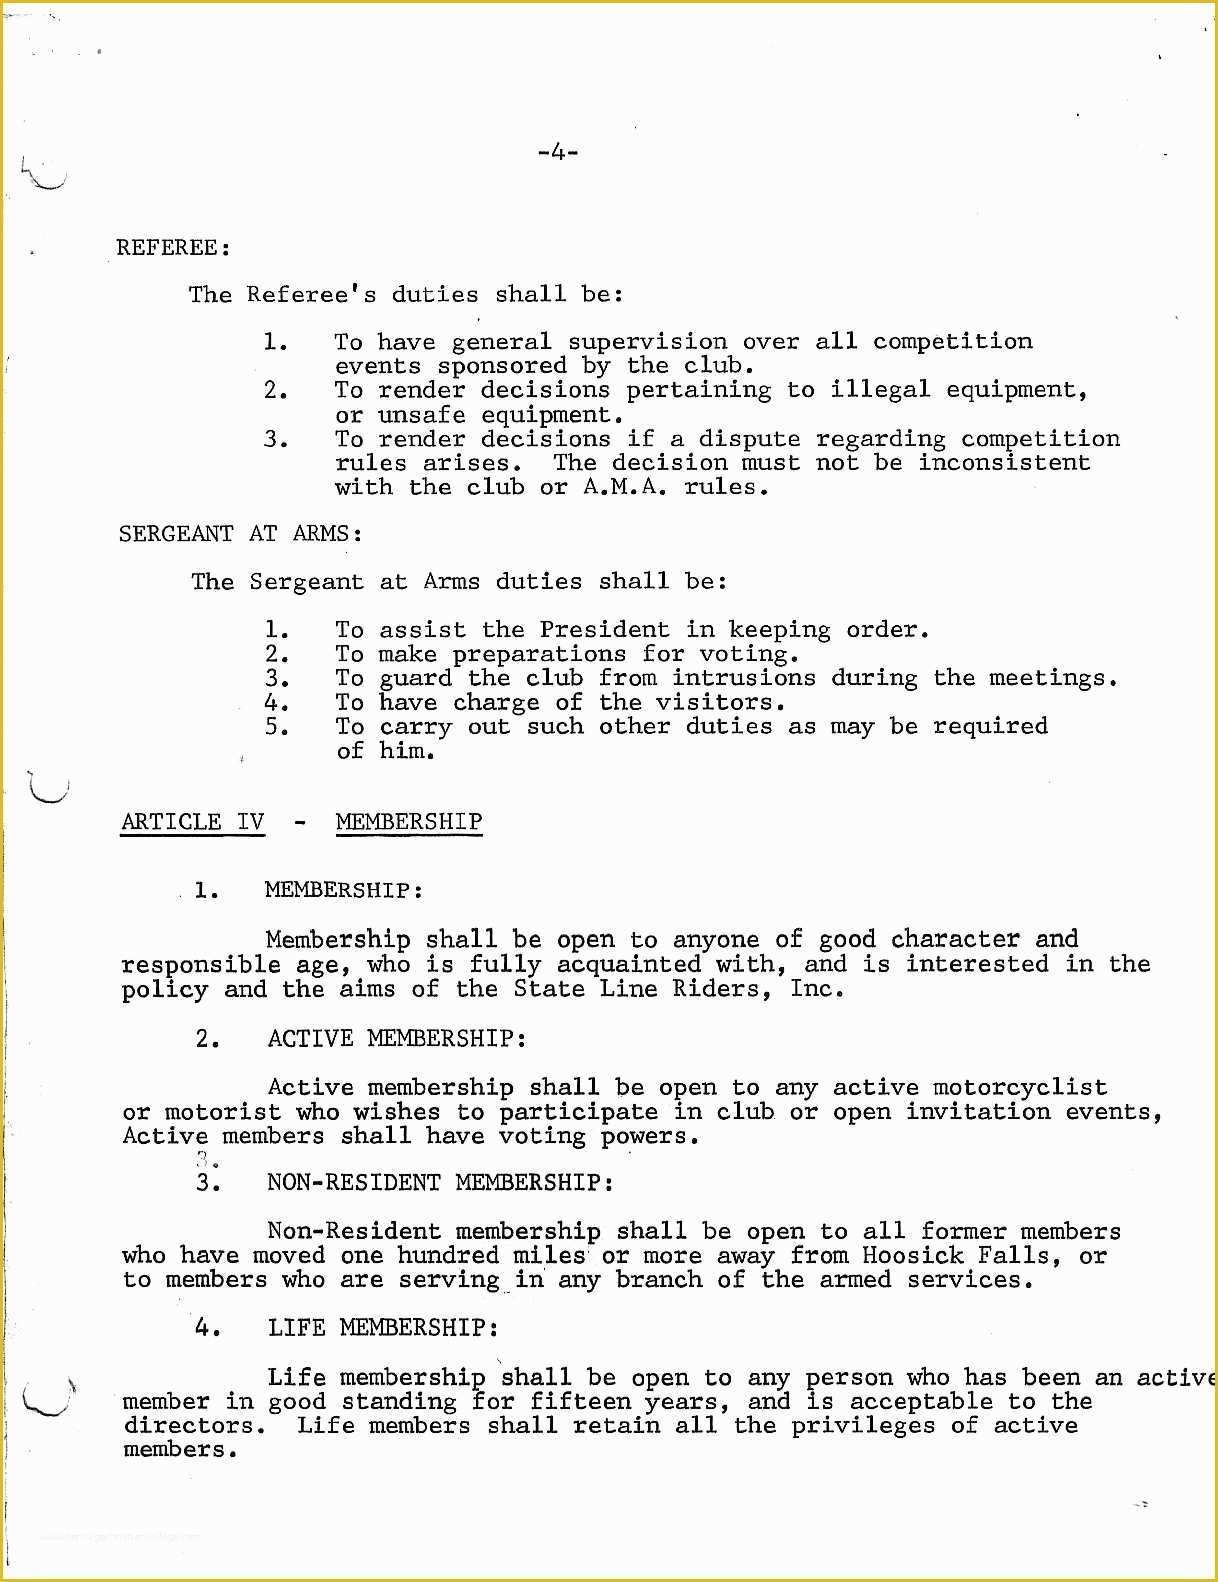 Free bylaws Template Of Stateline Riders Motorcycle Club Club by Laws Collection